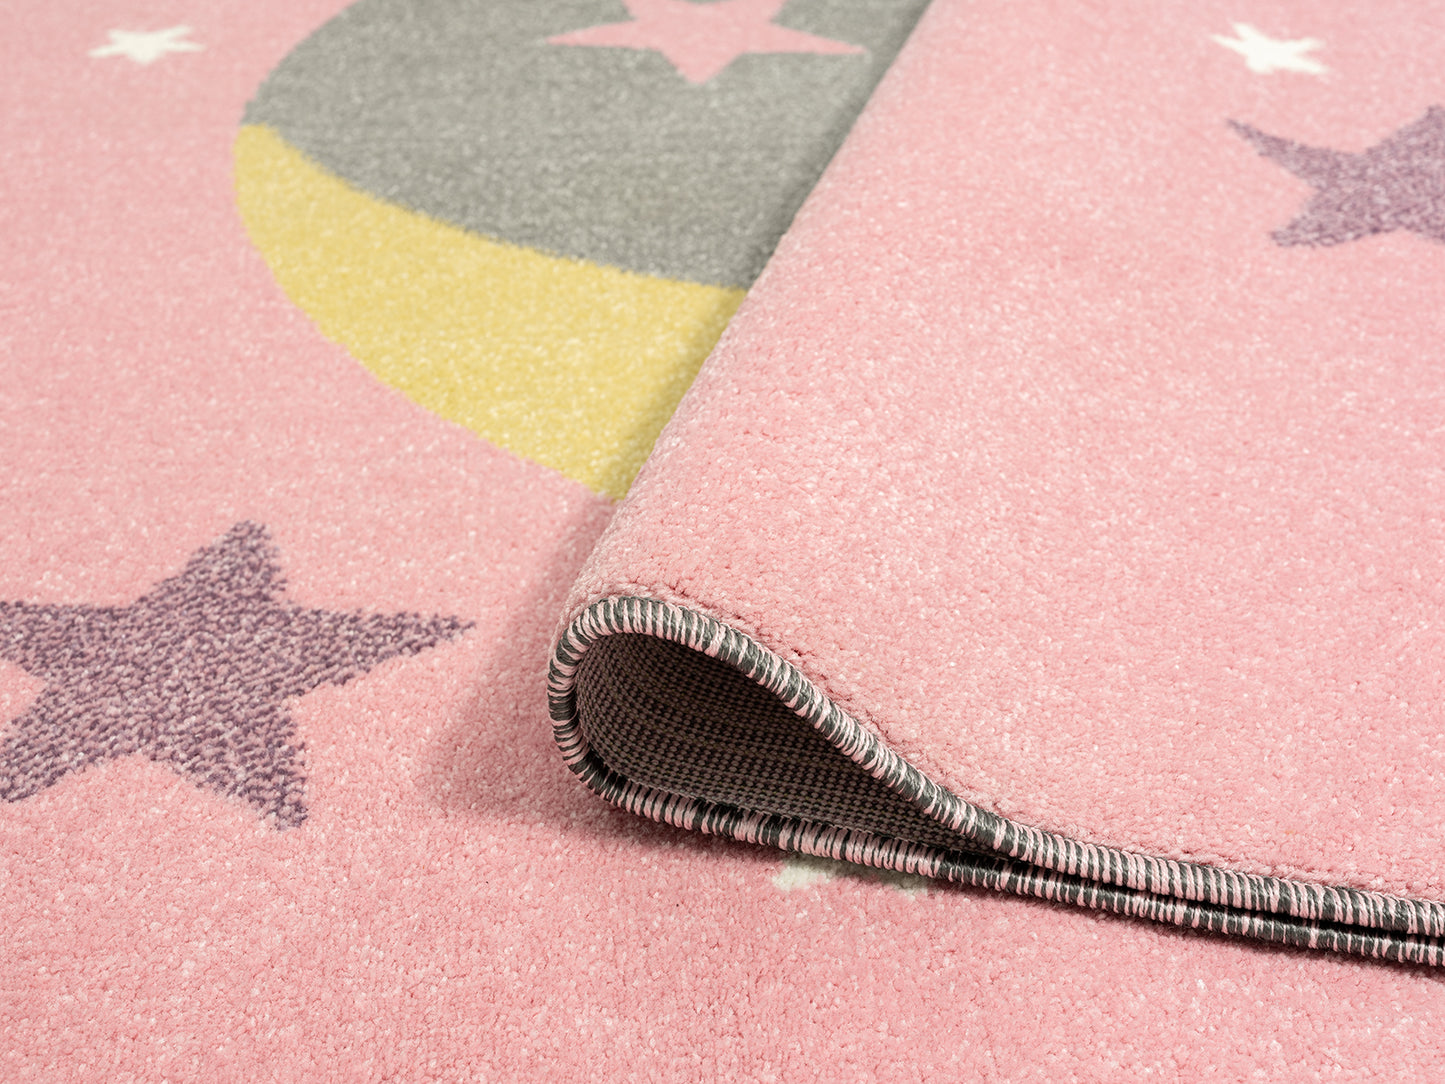 A to Z Moon Bear Kids Pink Area Rug